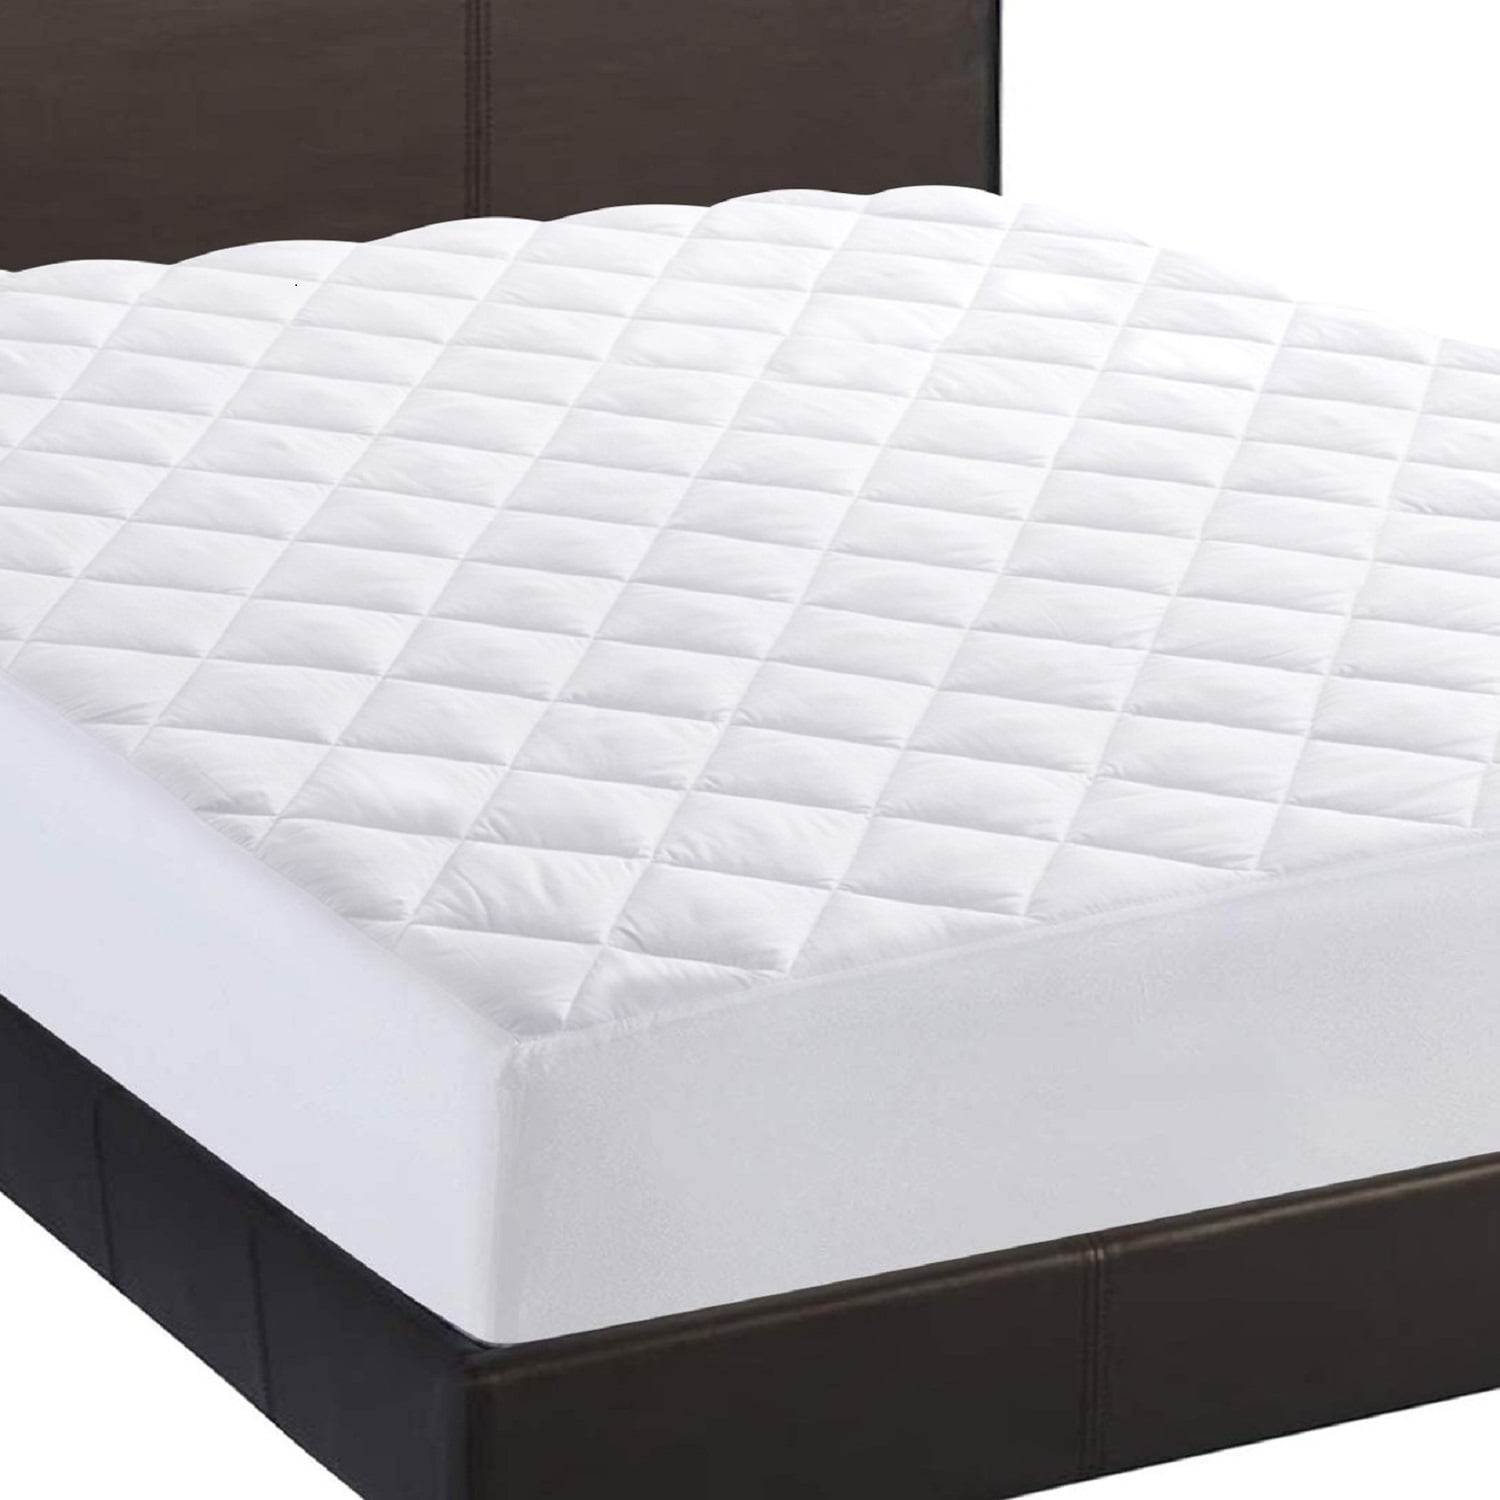 Extra Deep Quilted Mattress Protector Fitted Bed Cover All Sizes 